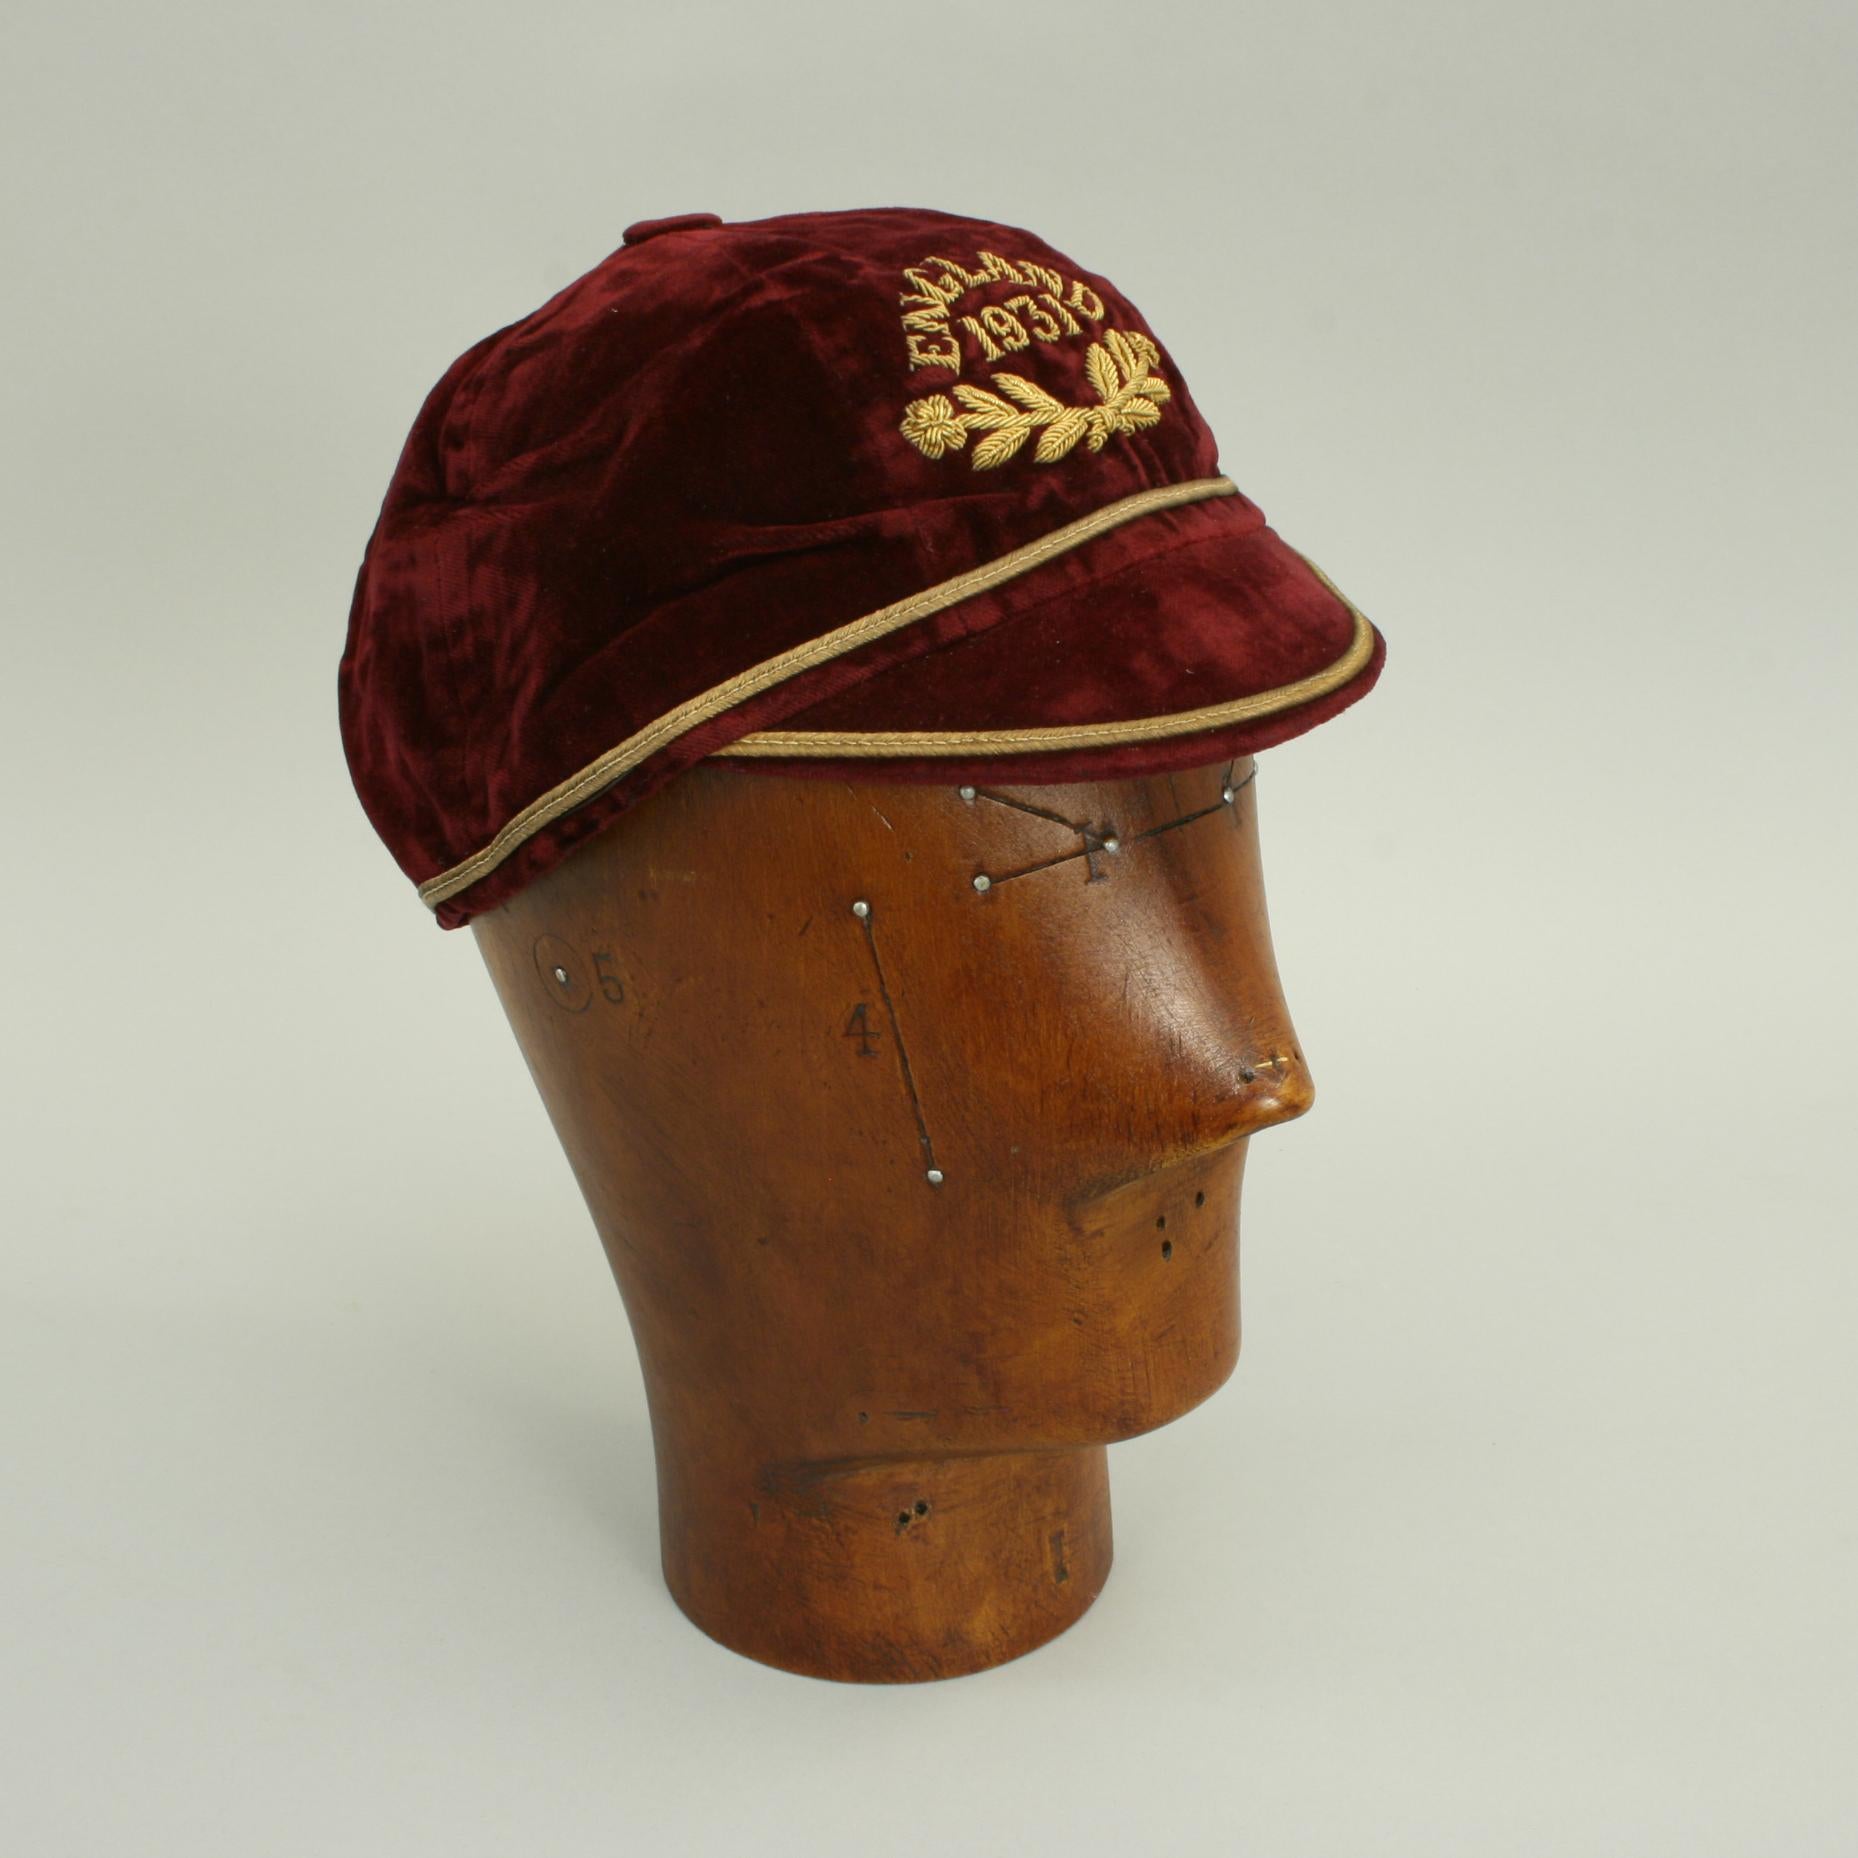 1931 England International Cap.
A wonderful red velvet Cap in fine condition with gold braid trim. The Cap also has a gold braid embroidered date of '1931' with two roses and the word 'England'. This was the property of William Martin (1906-1980)